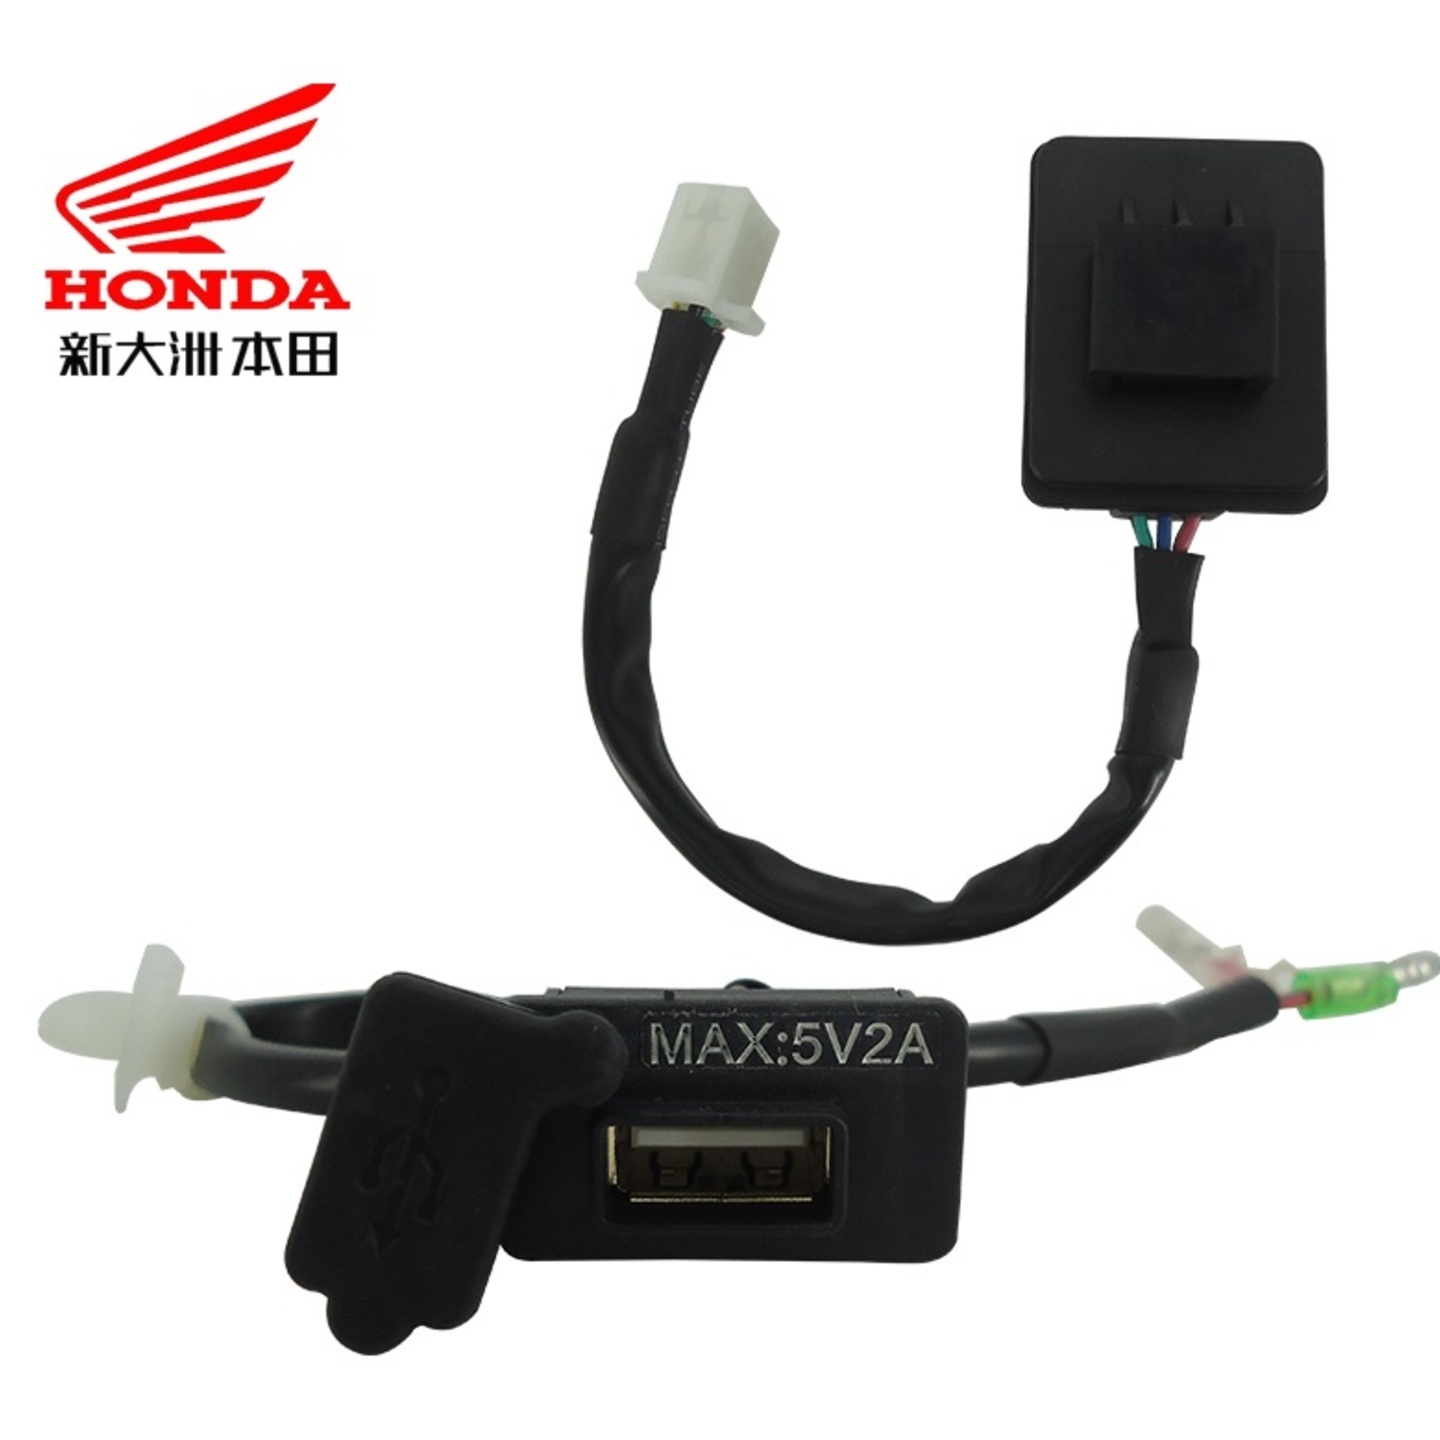 Honda CBF190X CBF190TR USB wire interface phone charger connector host DC converter outlet 